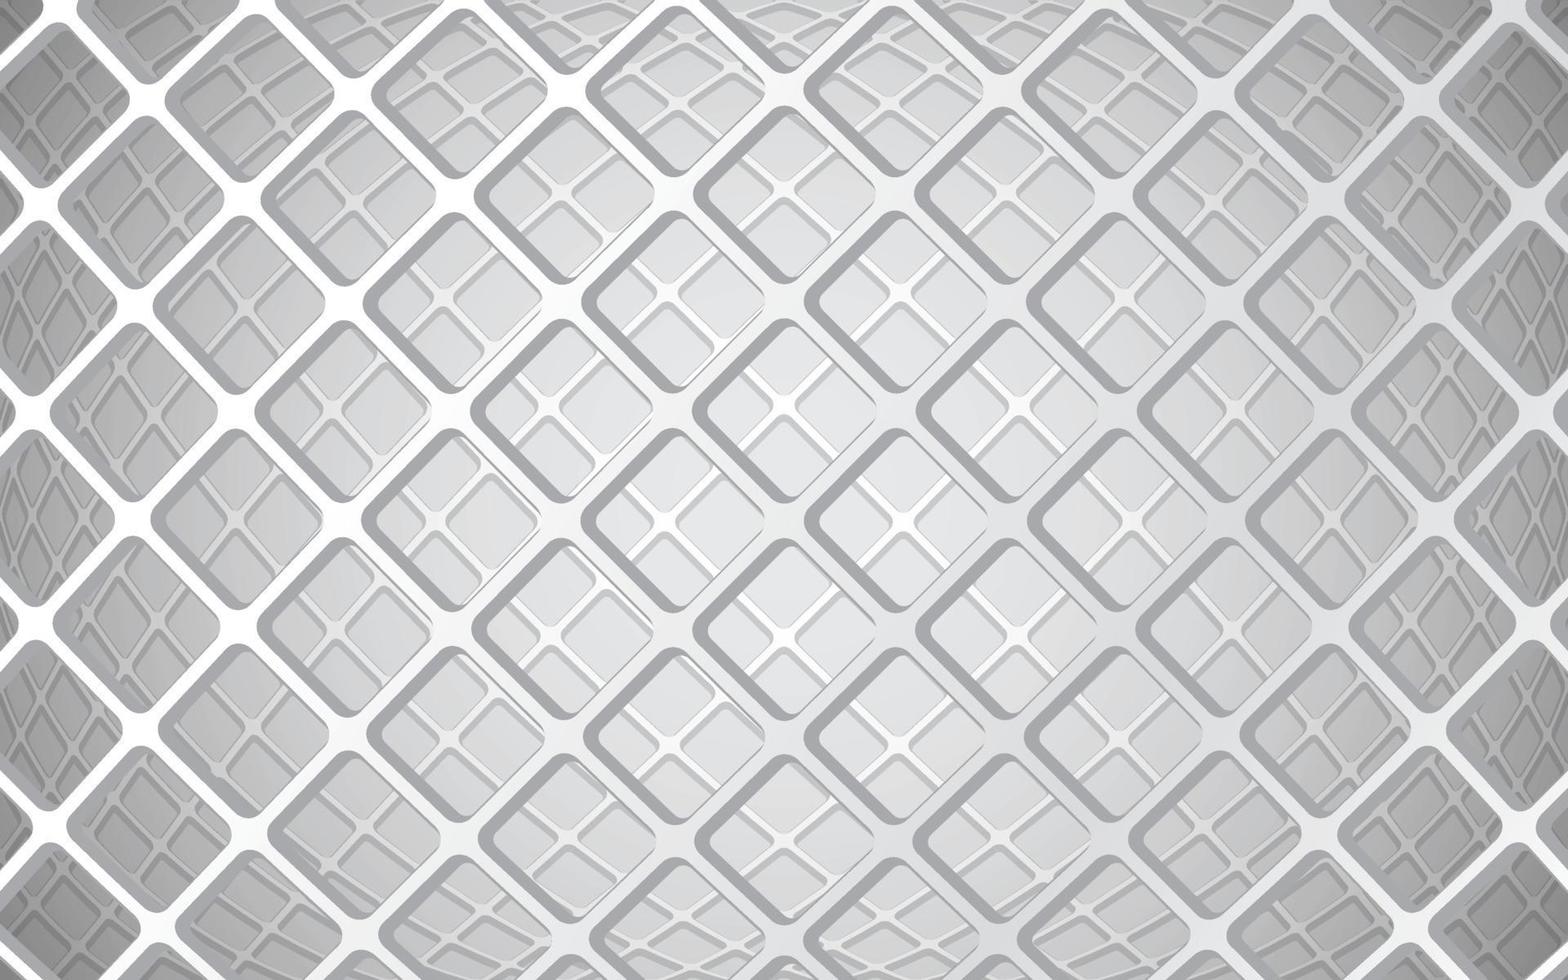 Twisted and rotated overlapping mesh structure background image vector